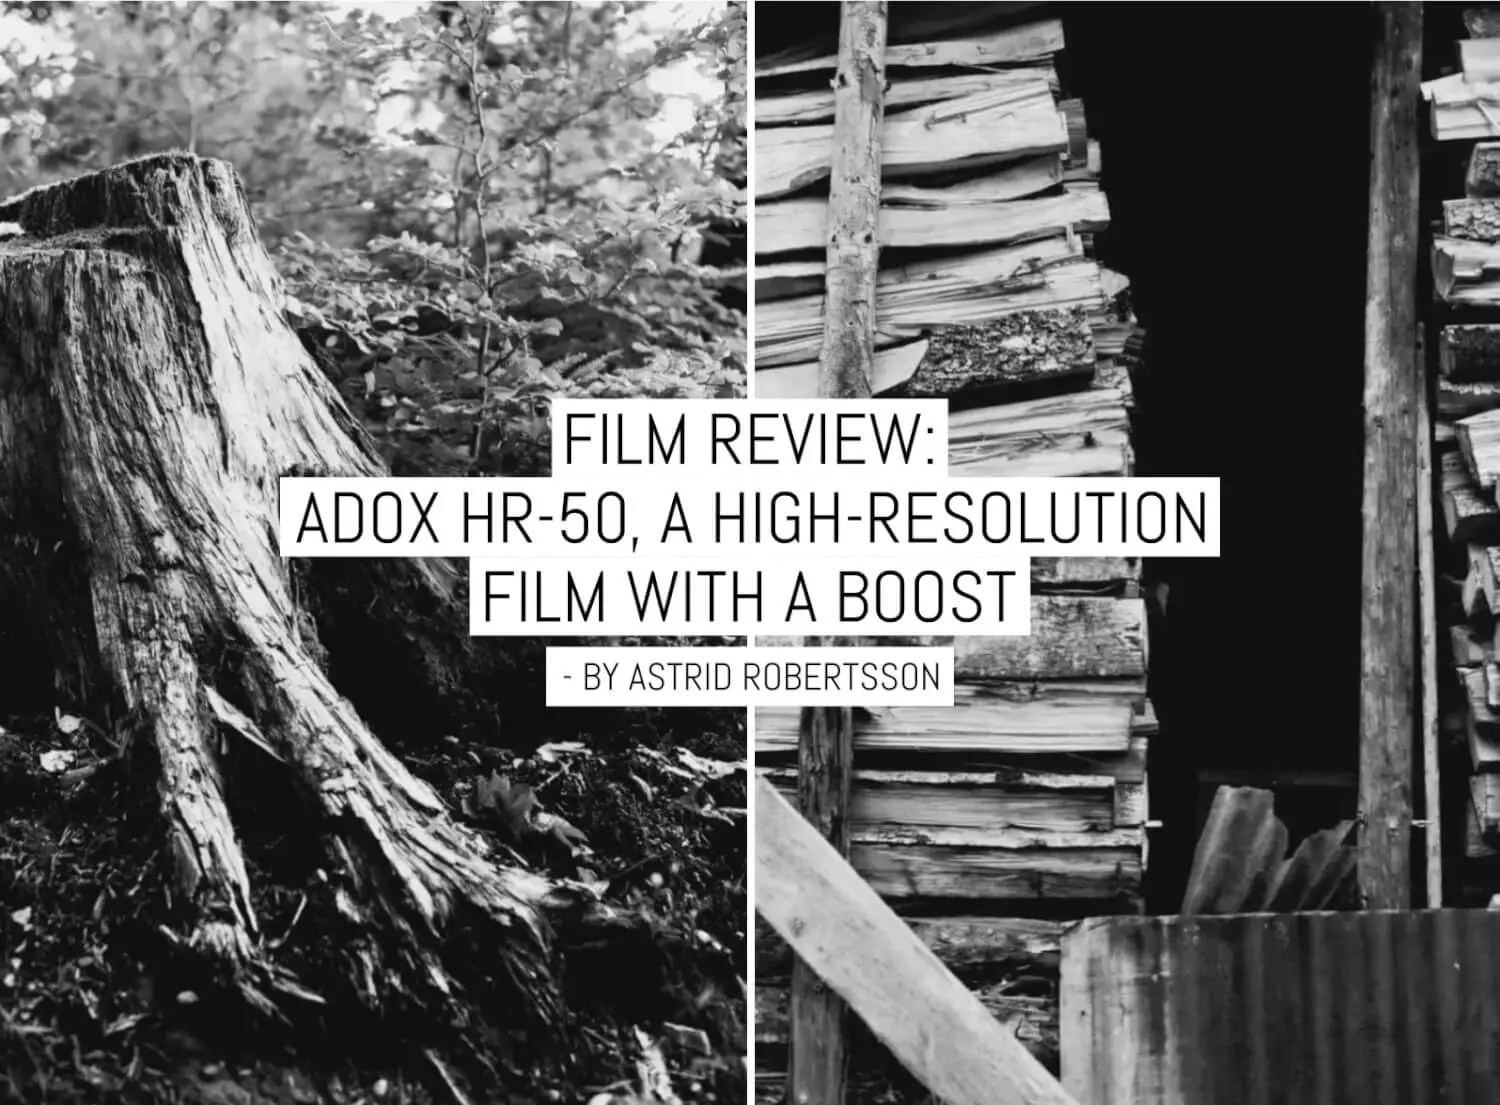 Film review: ADOX HR-50, a high-resolution film with a boost - EMULSIVE